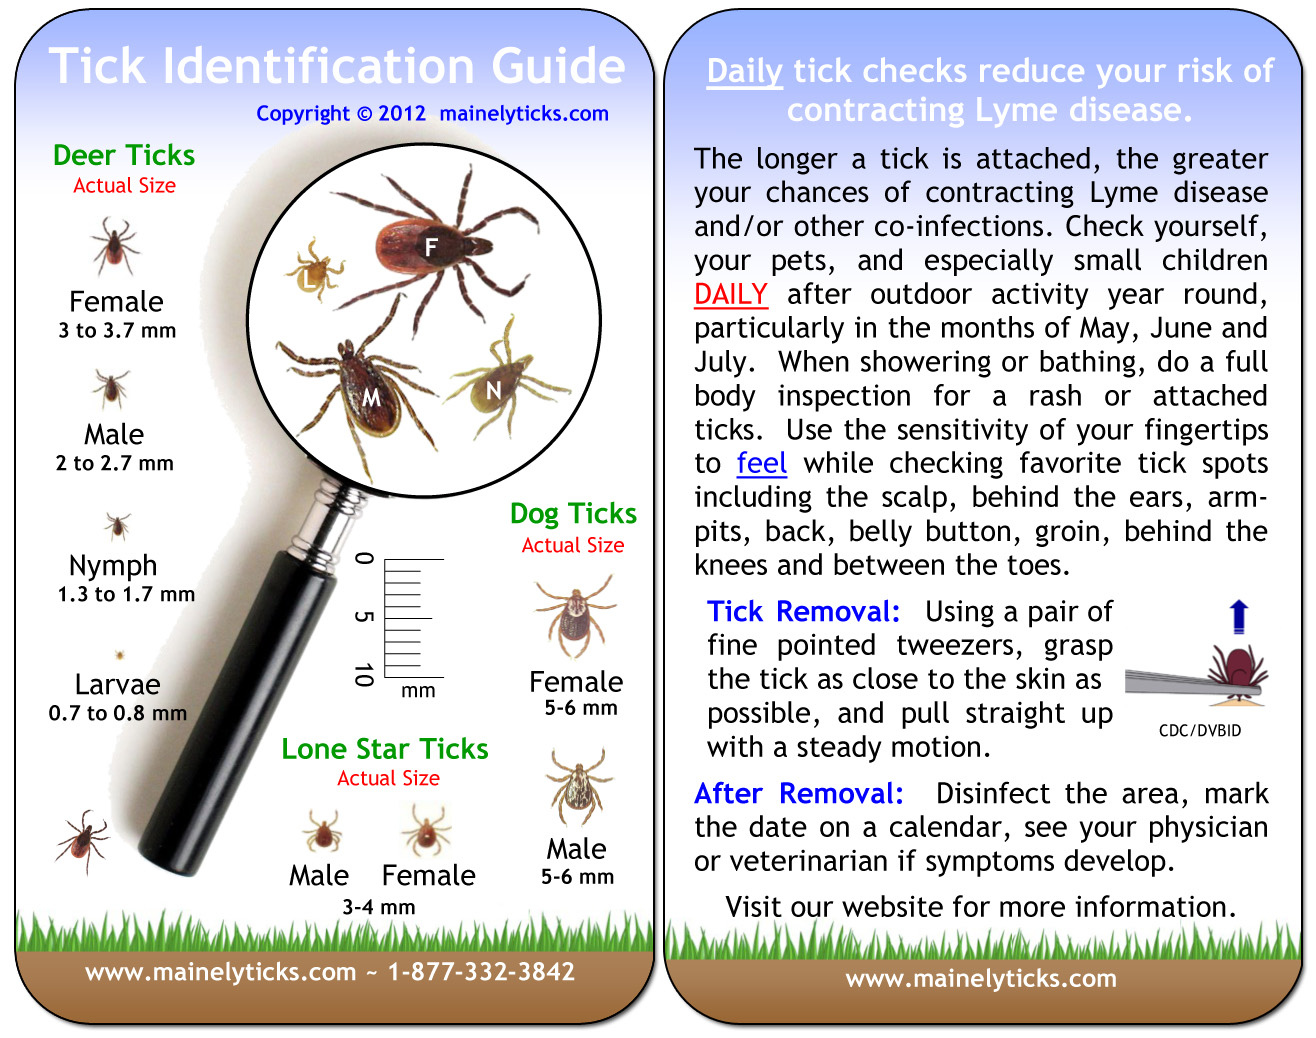 Lyme Disease Prevention Begins With Proper Tick Identification And